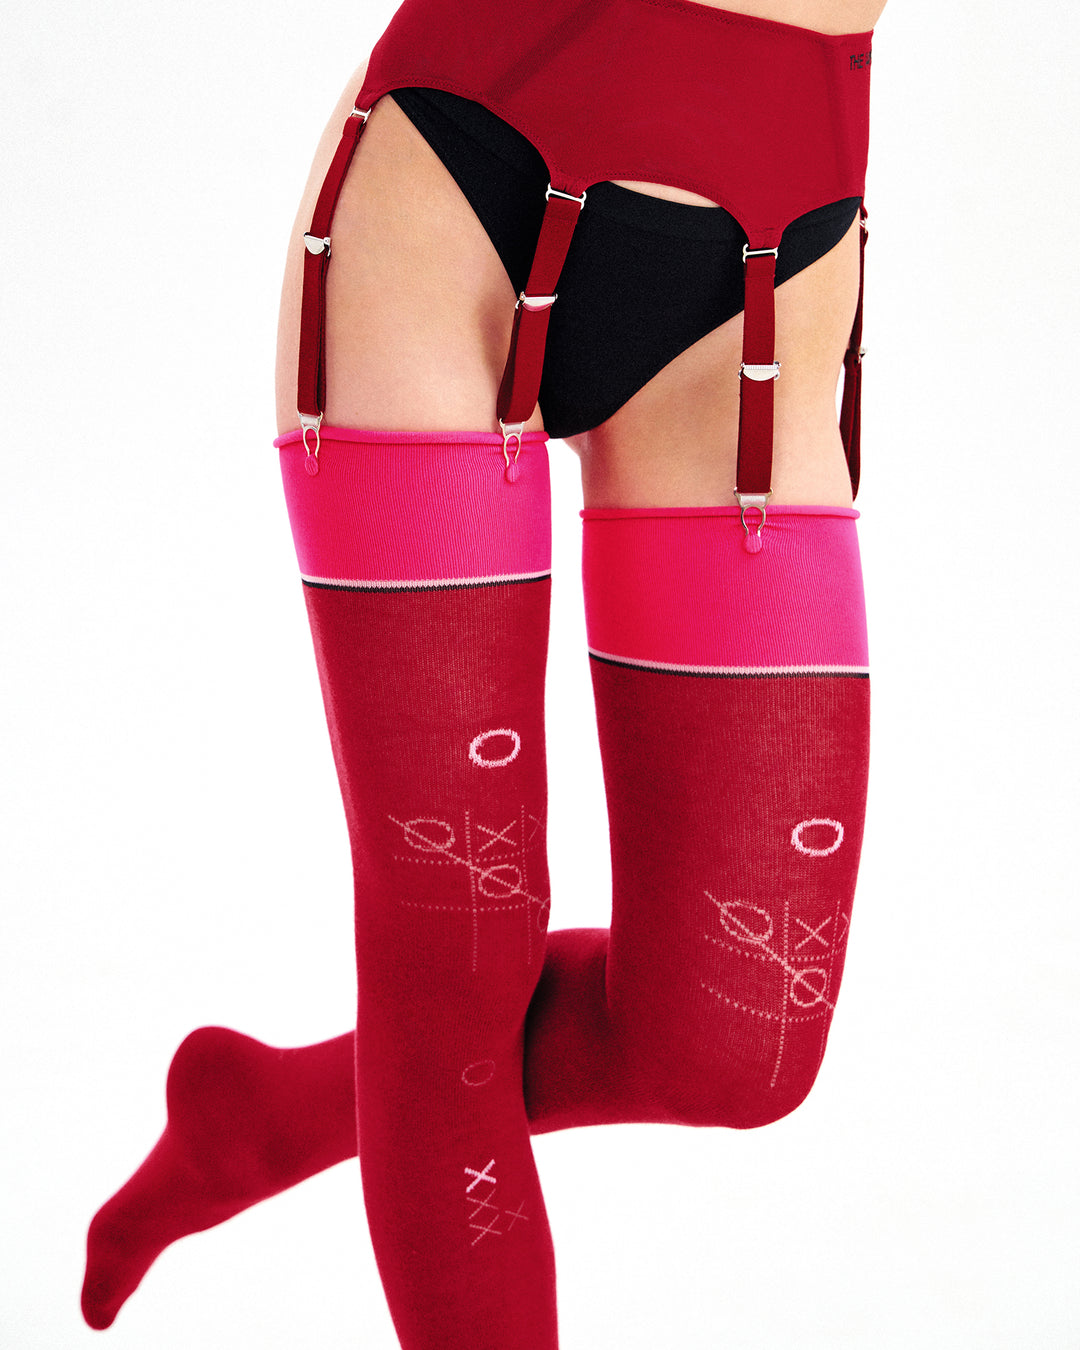 Victory Rouge stockings